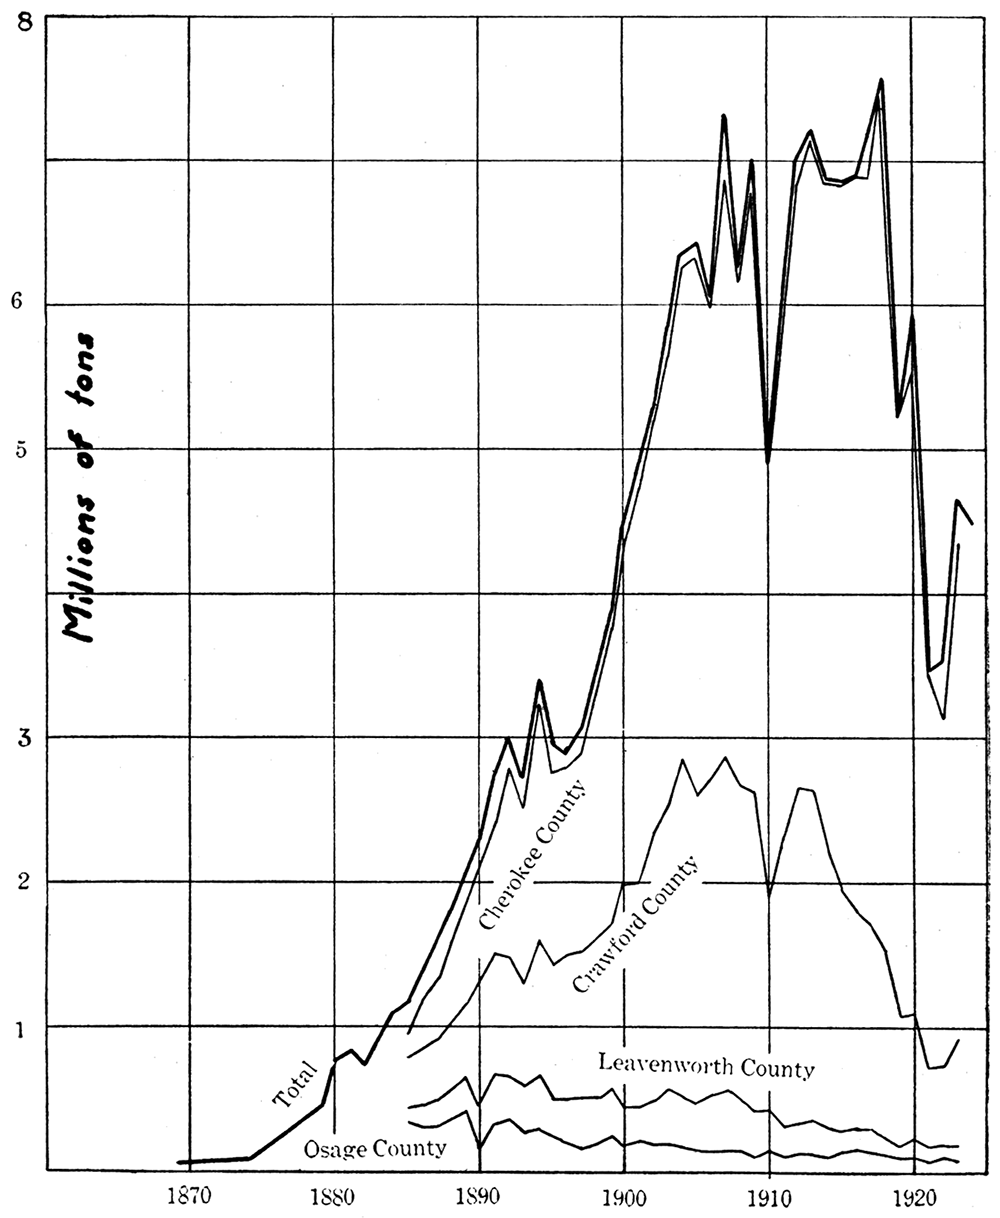 Curve showing the cumulative production of coal in Osage, Leavenworth, Cherokee, and Crawford counties.